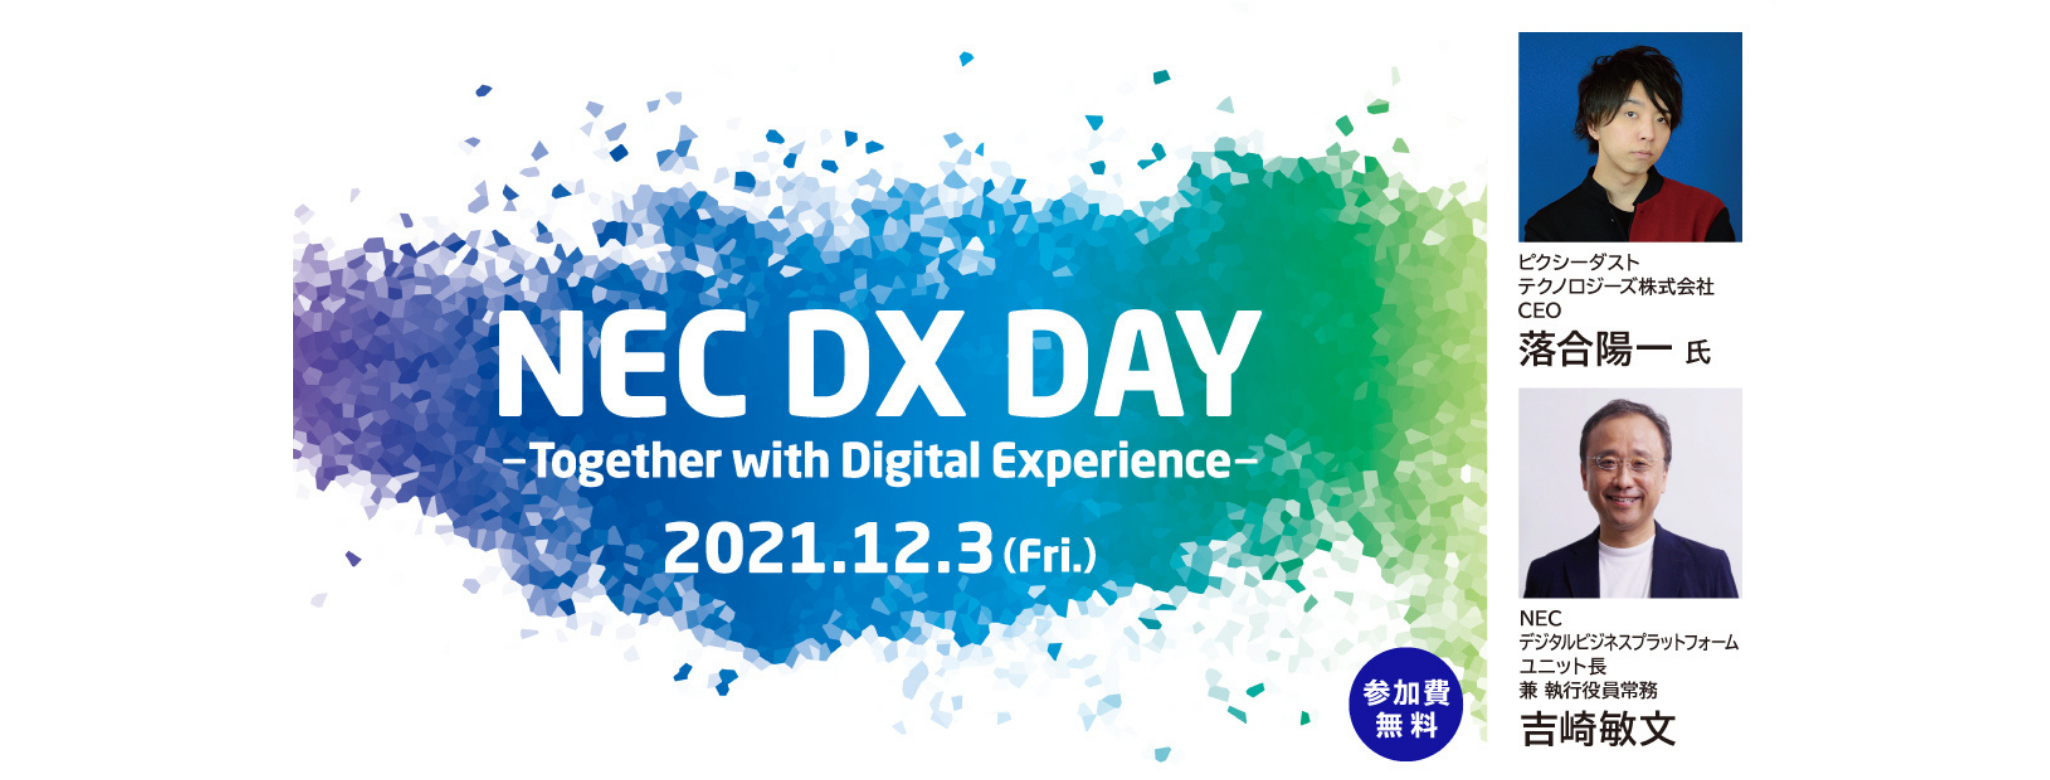  NEC DX DAY ~Together with Digital Experience~ 